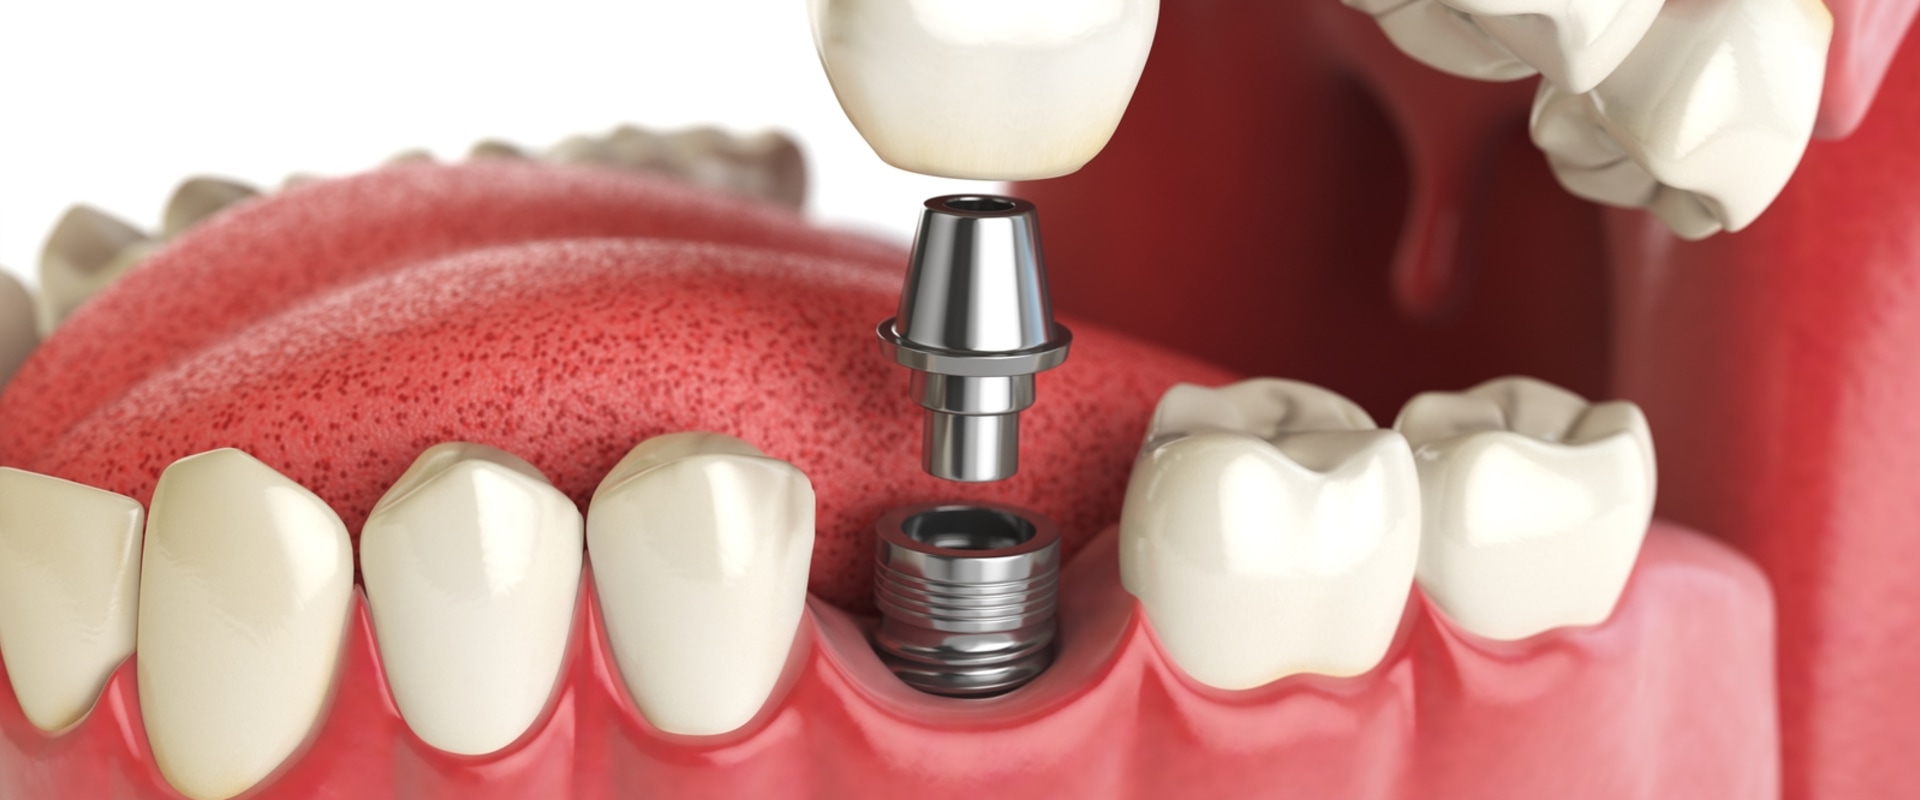 Can I Get a Dental Implant After Radiation Therapy to My Jaw?